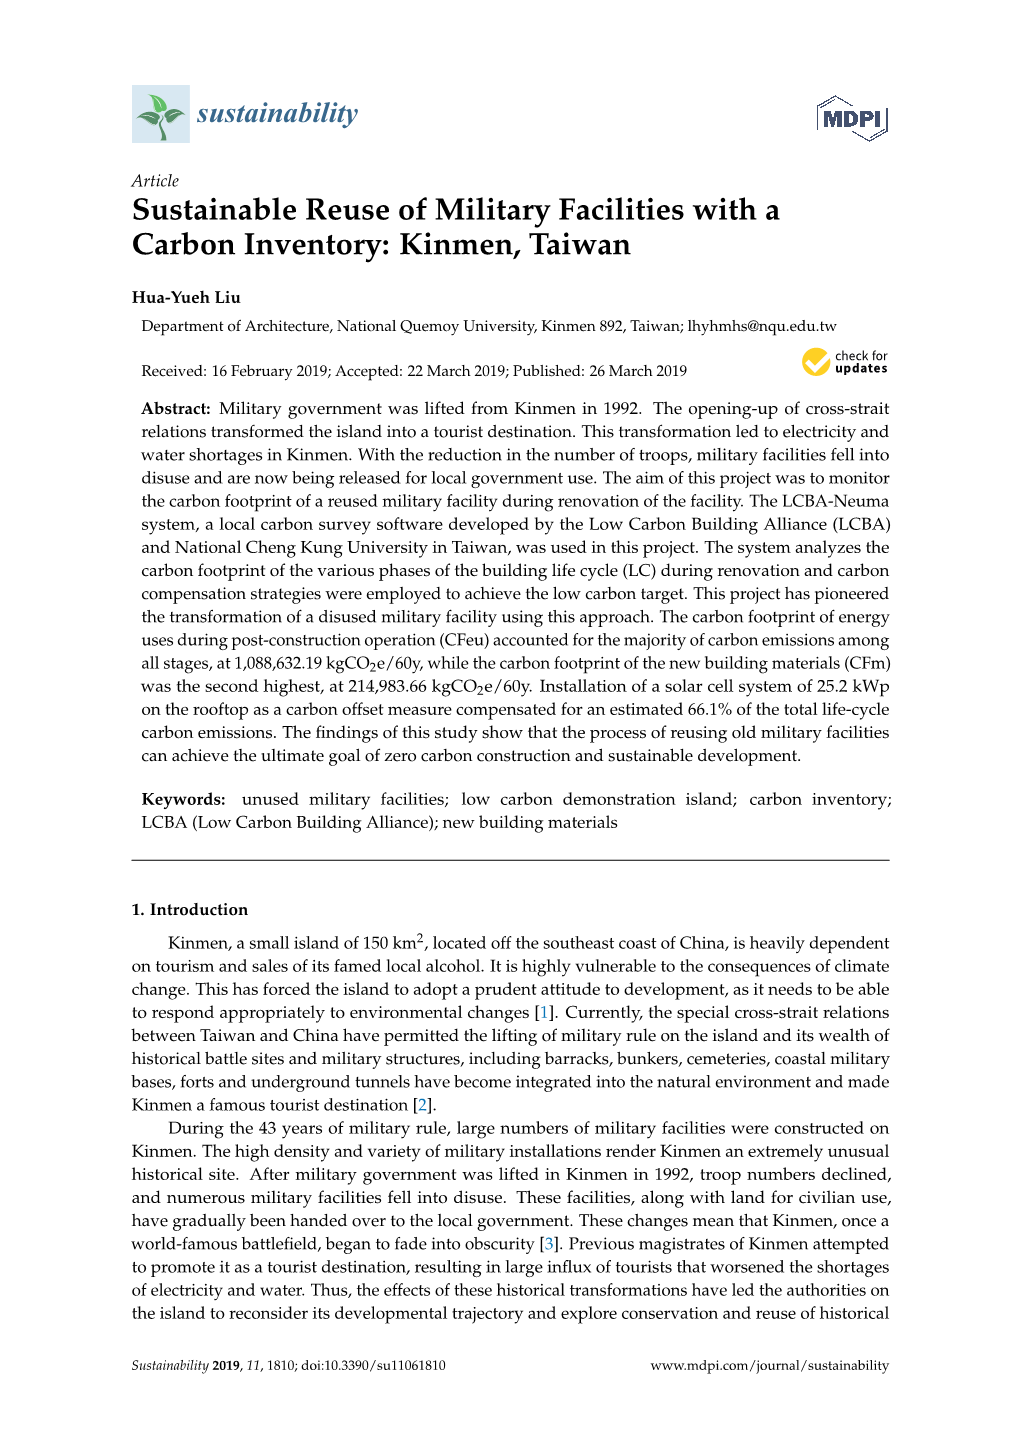 Sustainable Reuse of Military Facilities with a Carbon Inventory: Kinmen, Taiwan